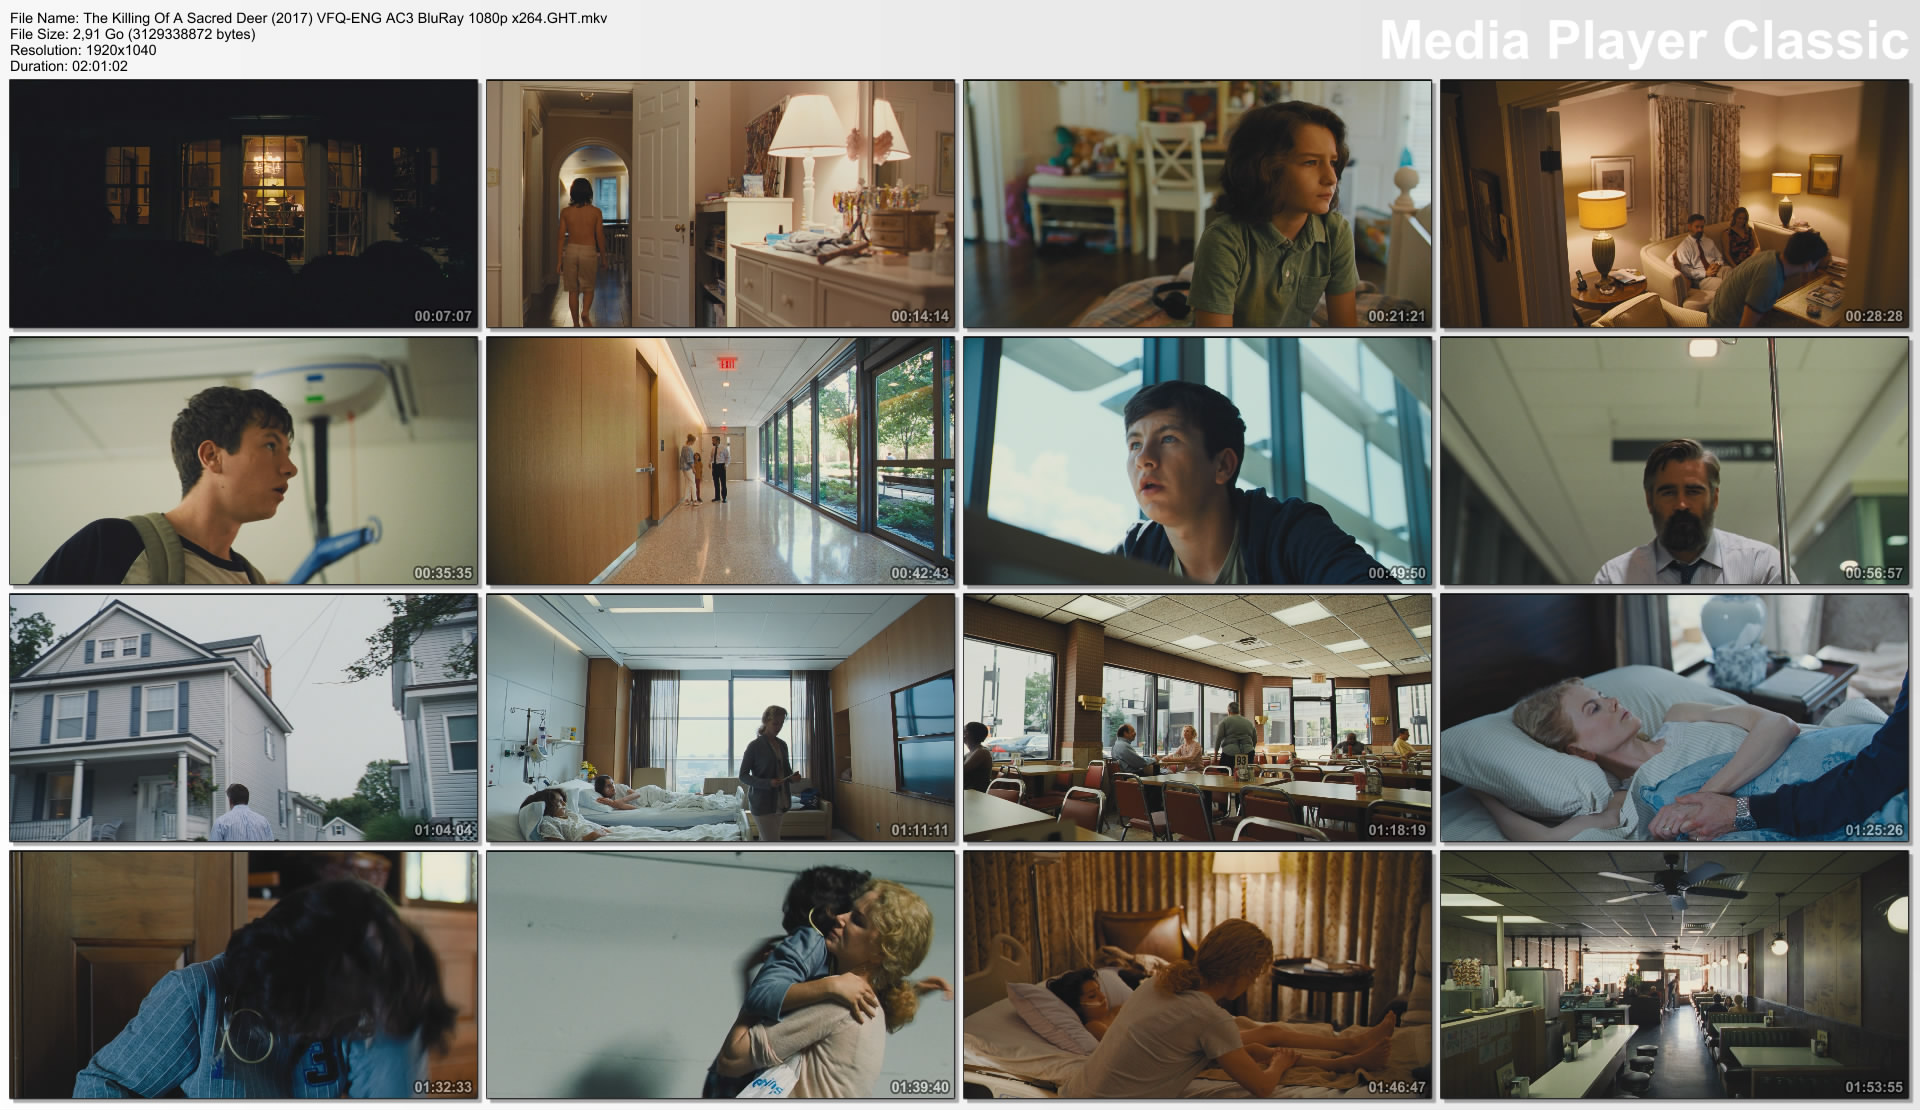 The Killing Of A Sacred Deer (2017) VFQ-ENG AC3 BluRay 1080p x264.GHT